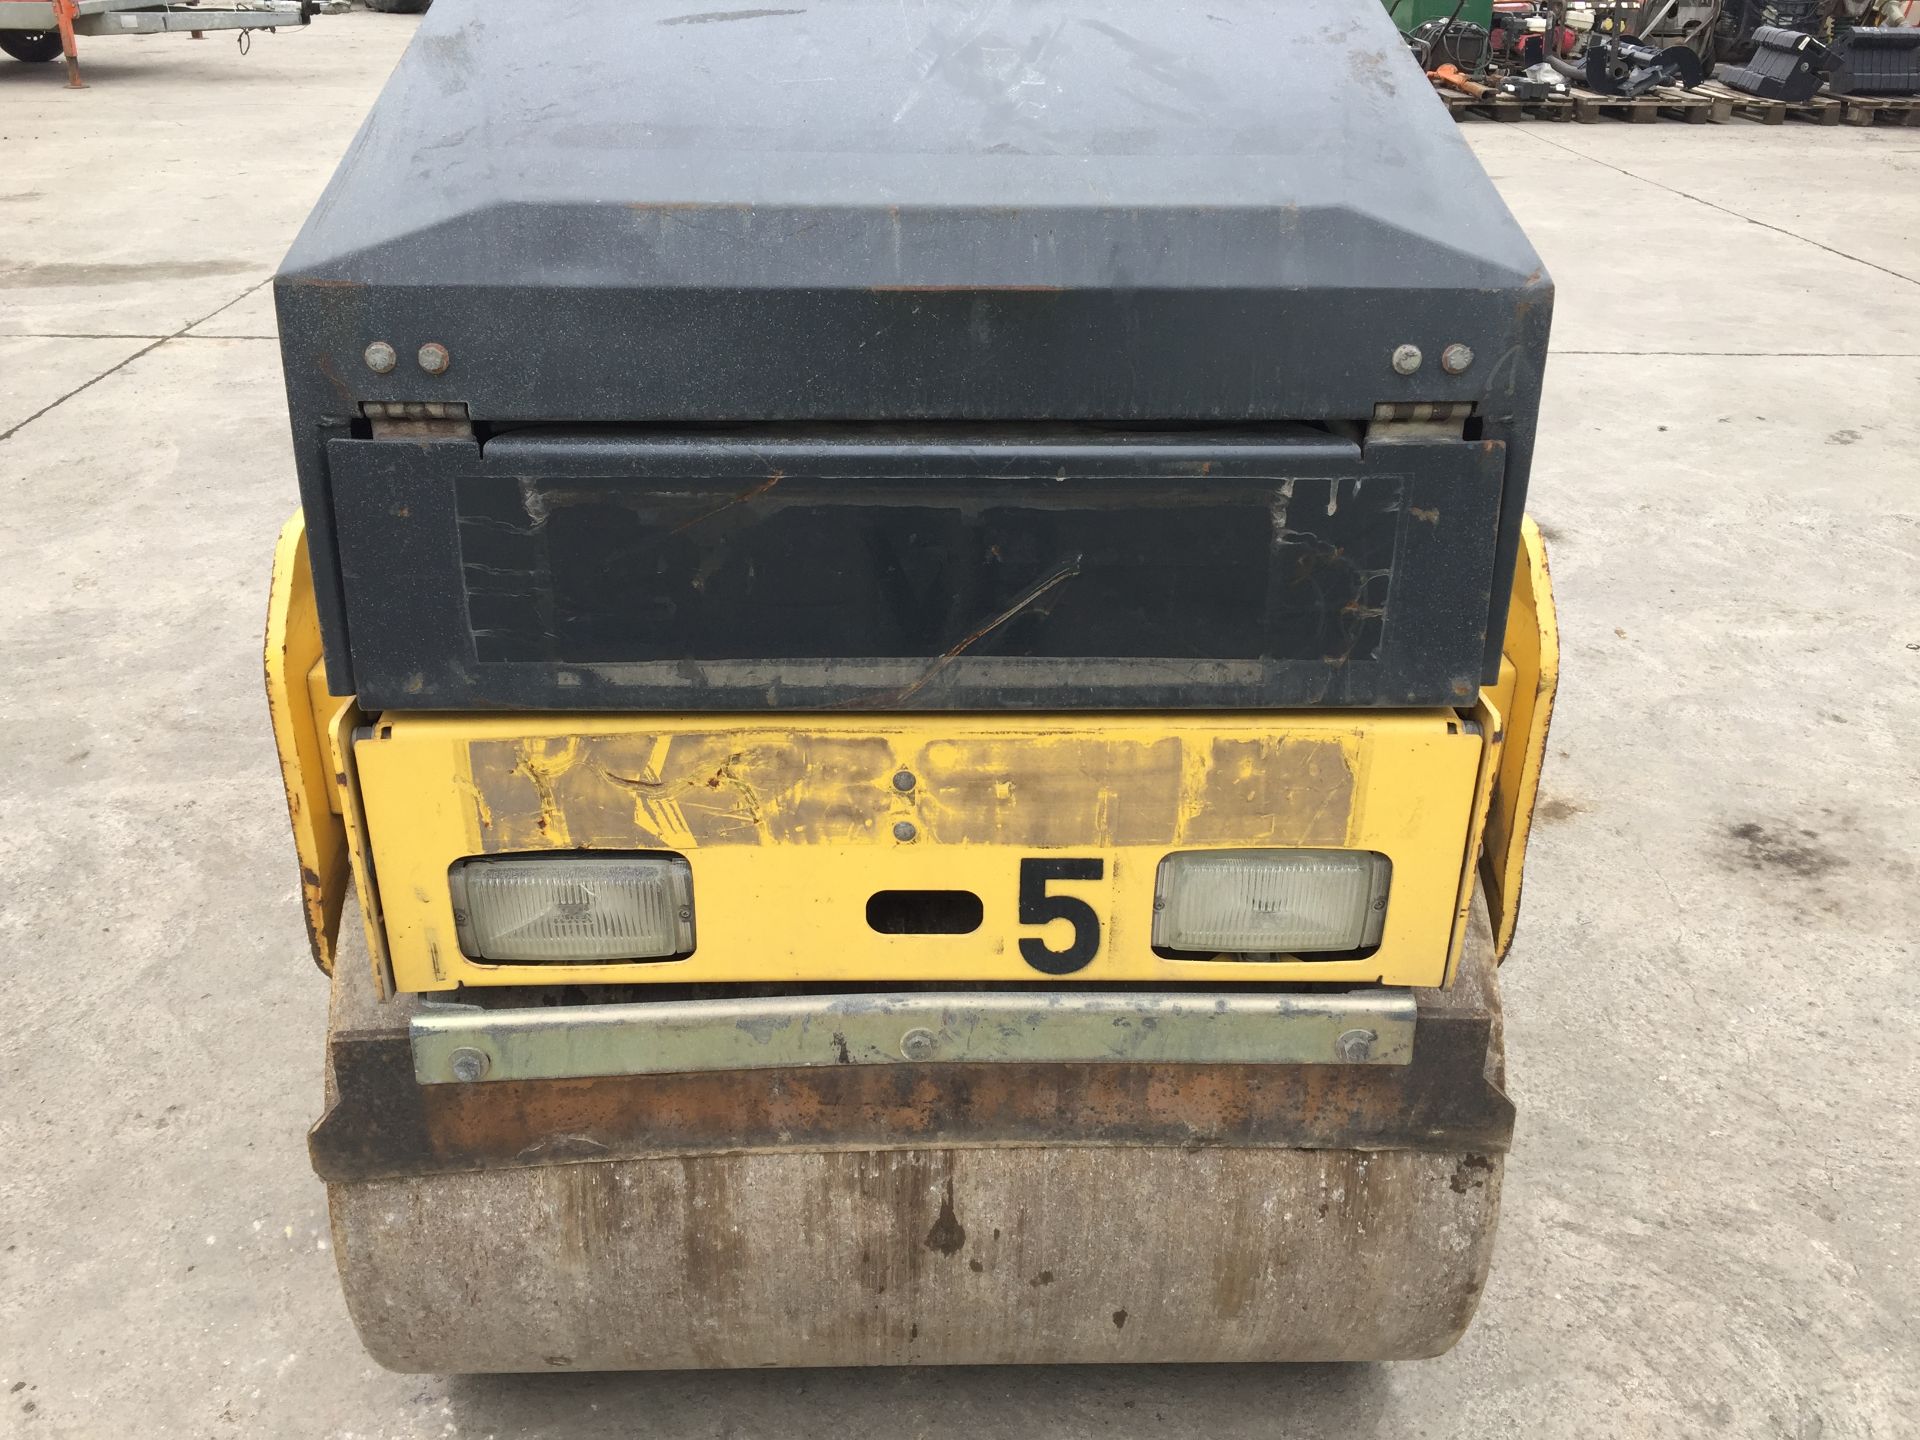 PL-14905 2006 Bomag BW90-AD2 Twin Drum Roller - Image 12 of 21